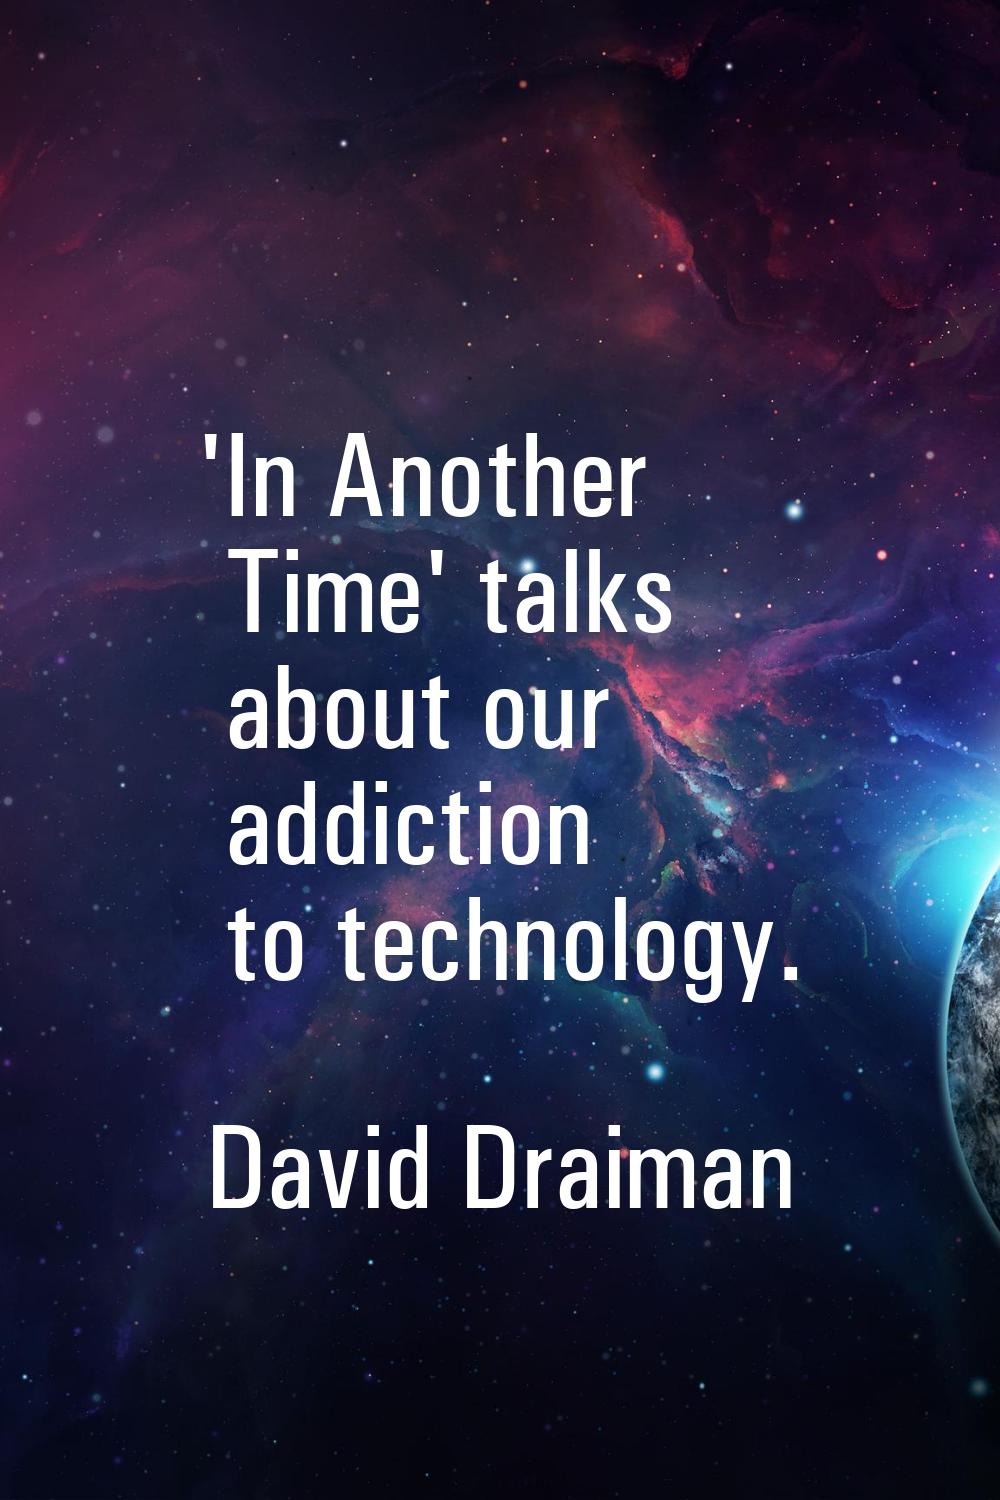 'In Another Time' talks about our addiction to technology.